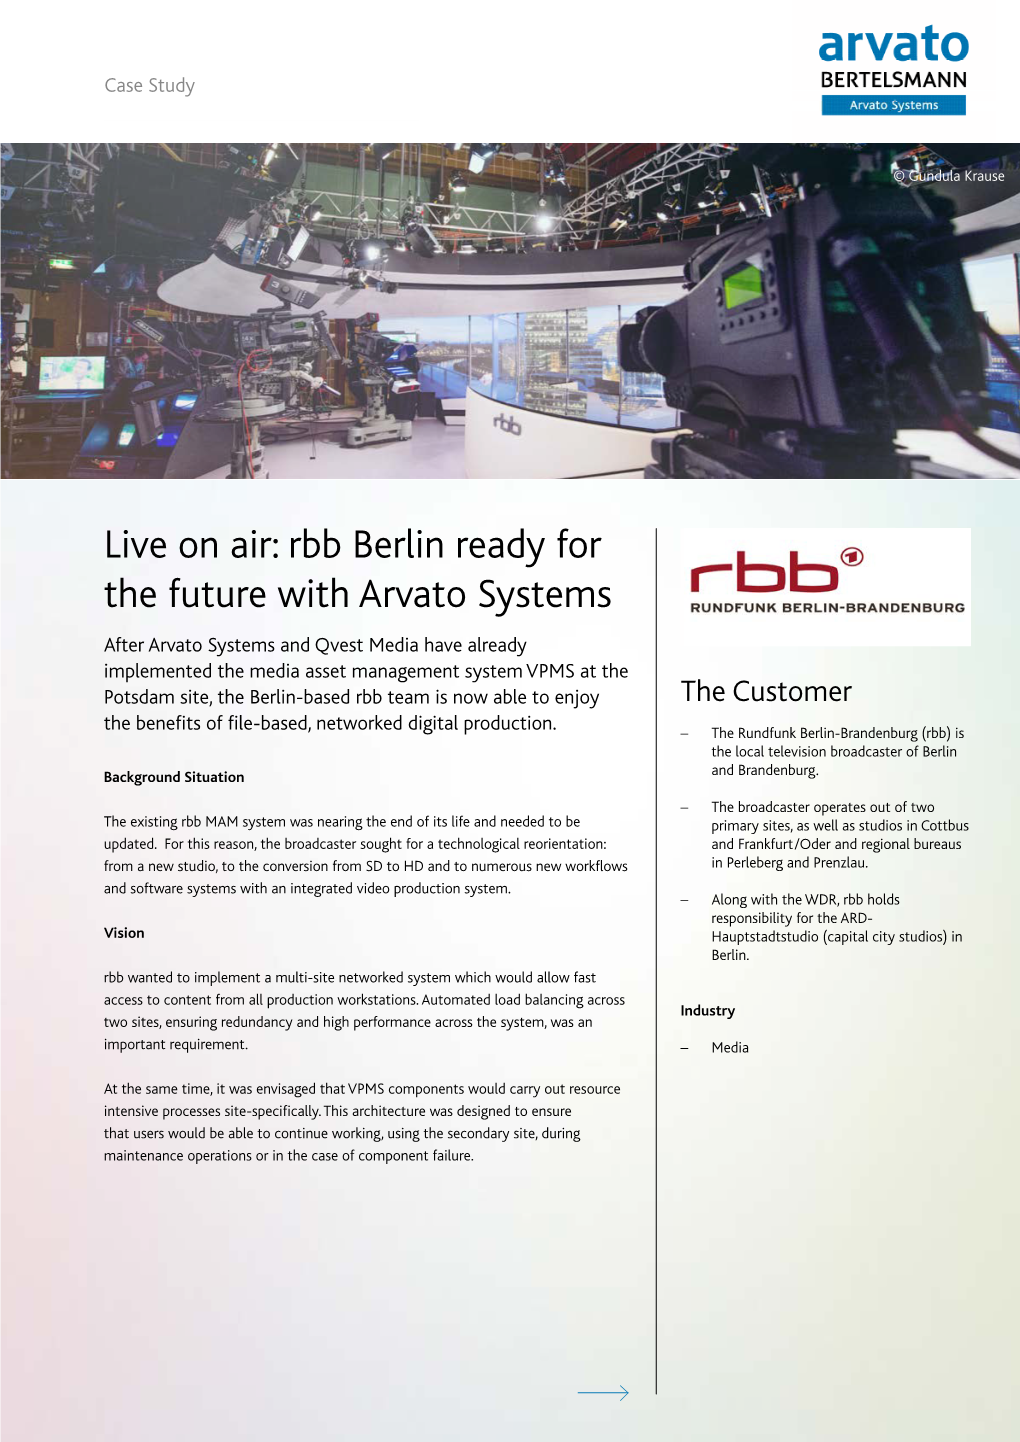 Live on Air: Rbb Berlin Ready for the Future with Arvato Systems